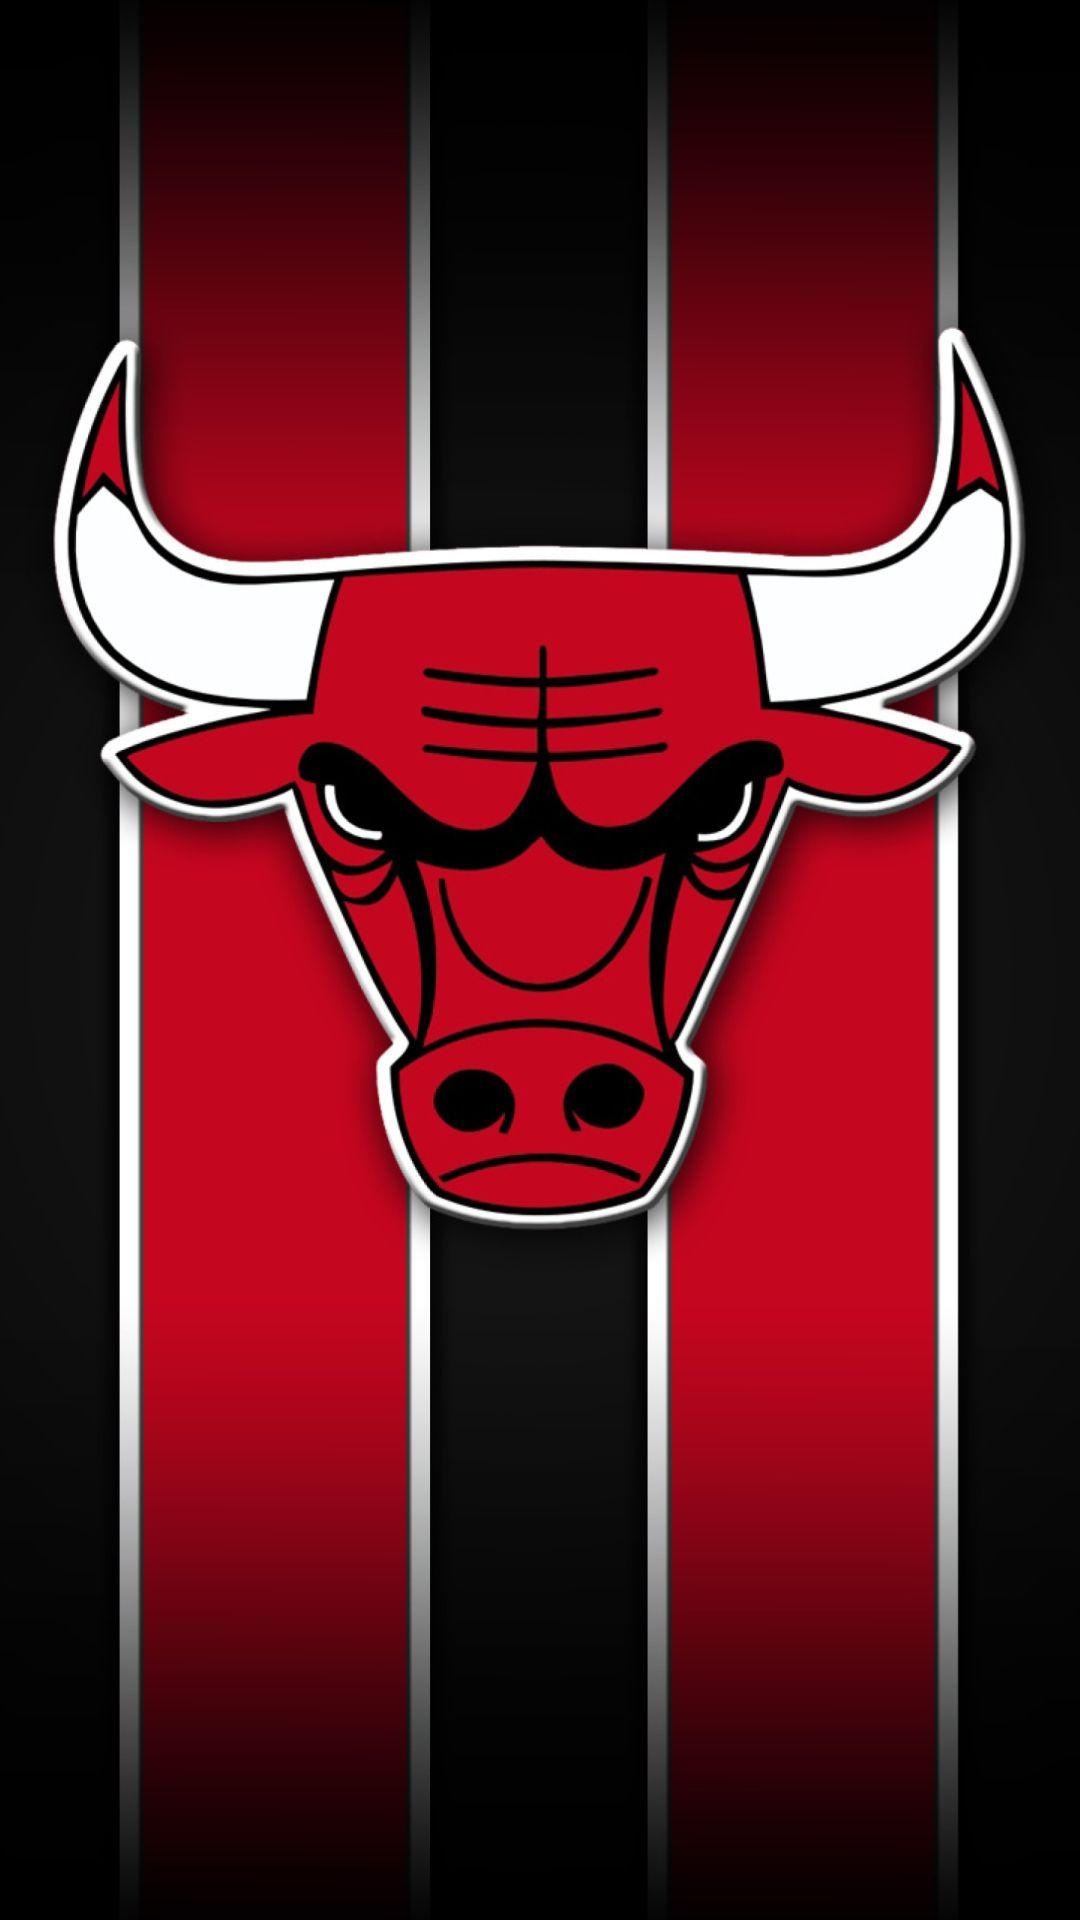 Bull Iphone Wallpapers Top Free Bull Iphone Backgrounds Wallpaperaccess